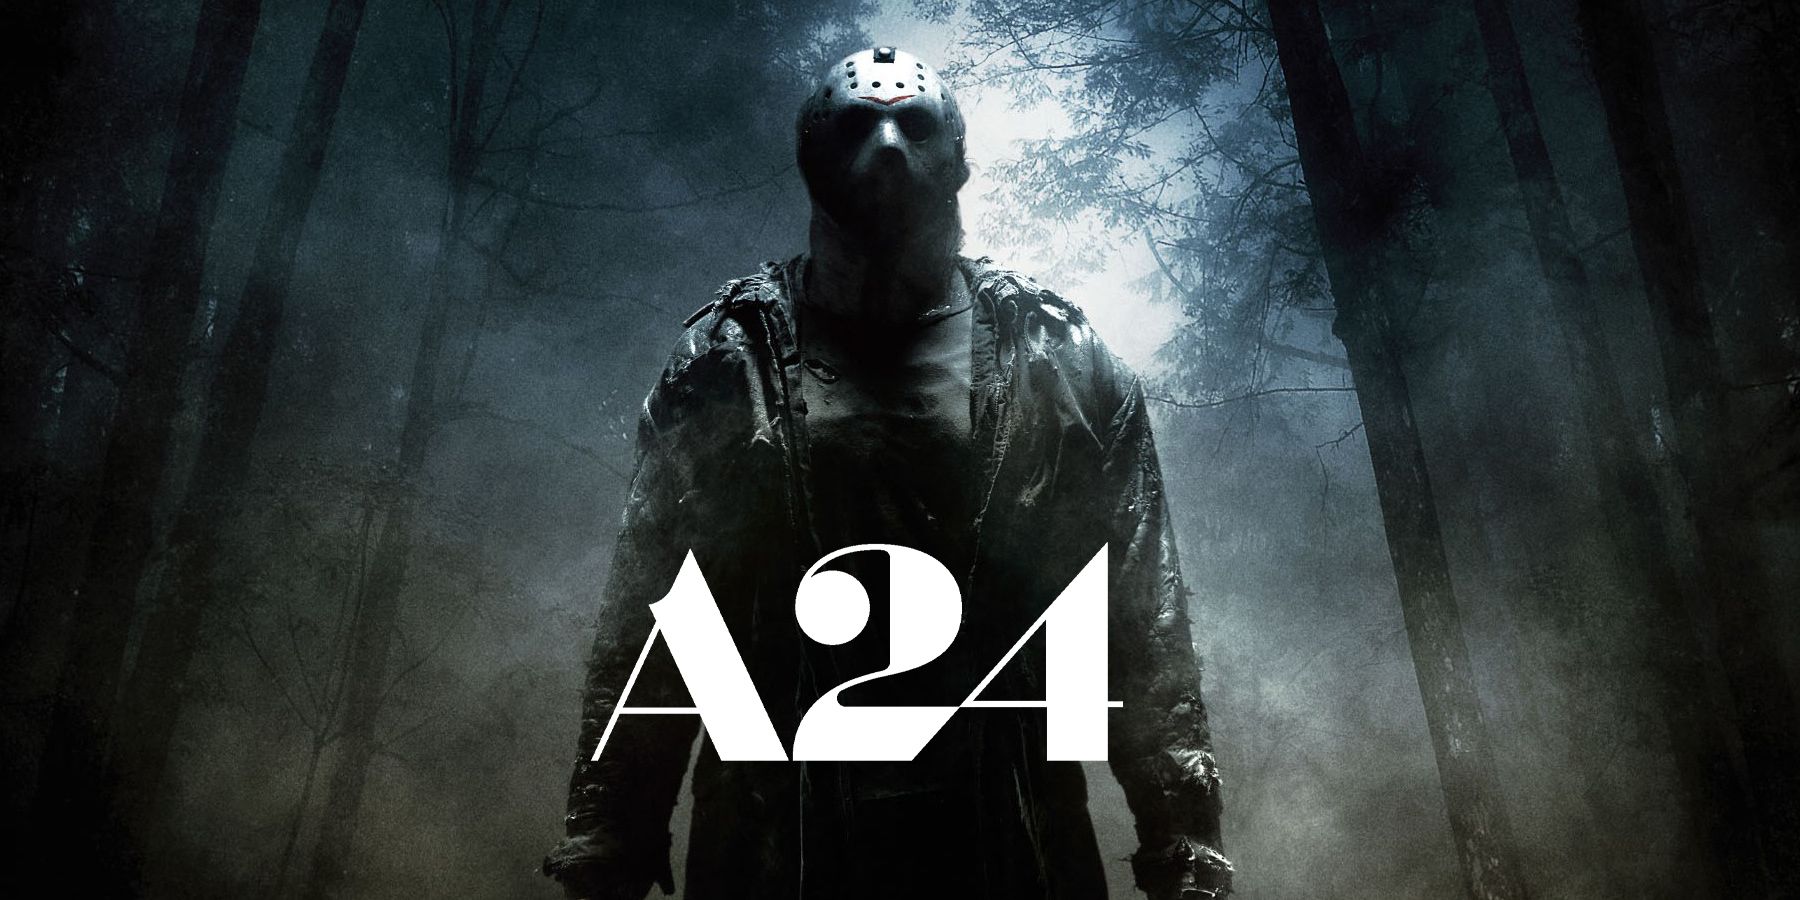 Friday the 13th Series Bryan Fuller A24